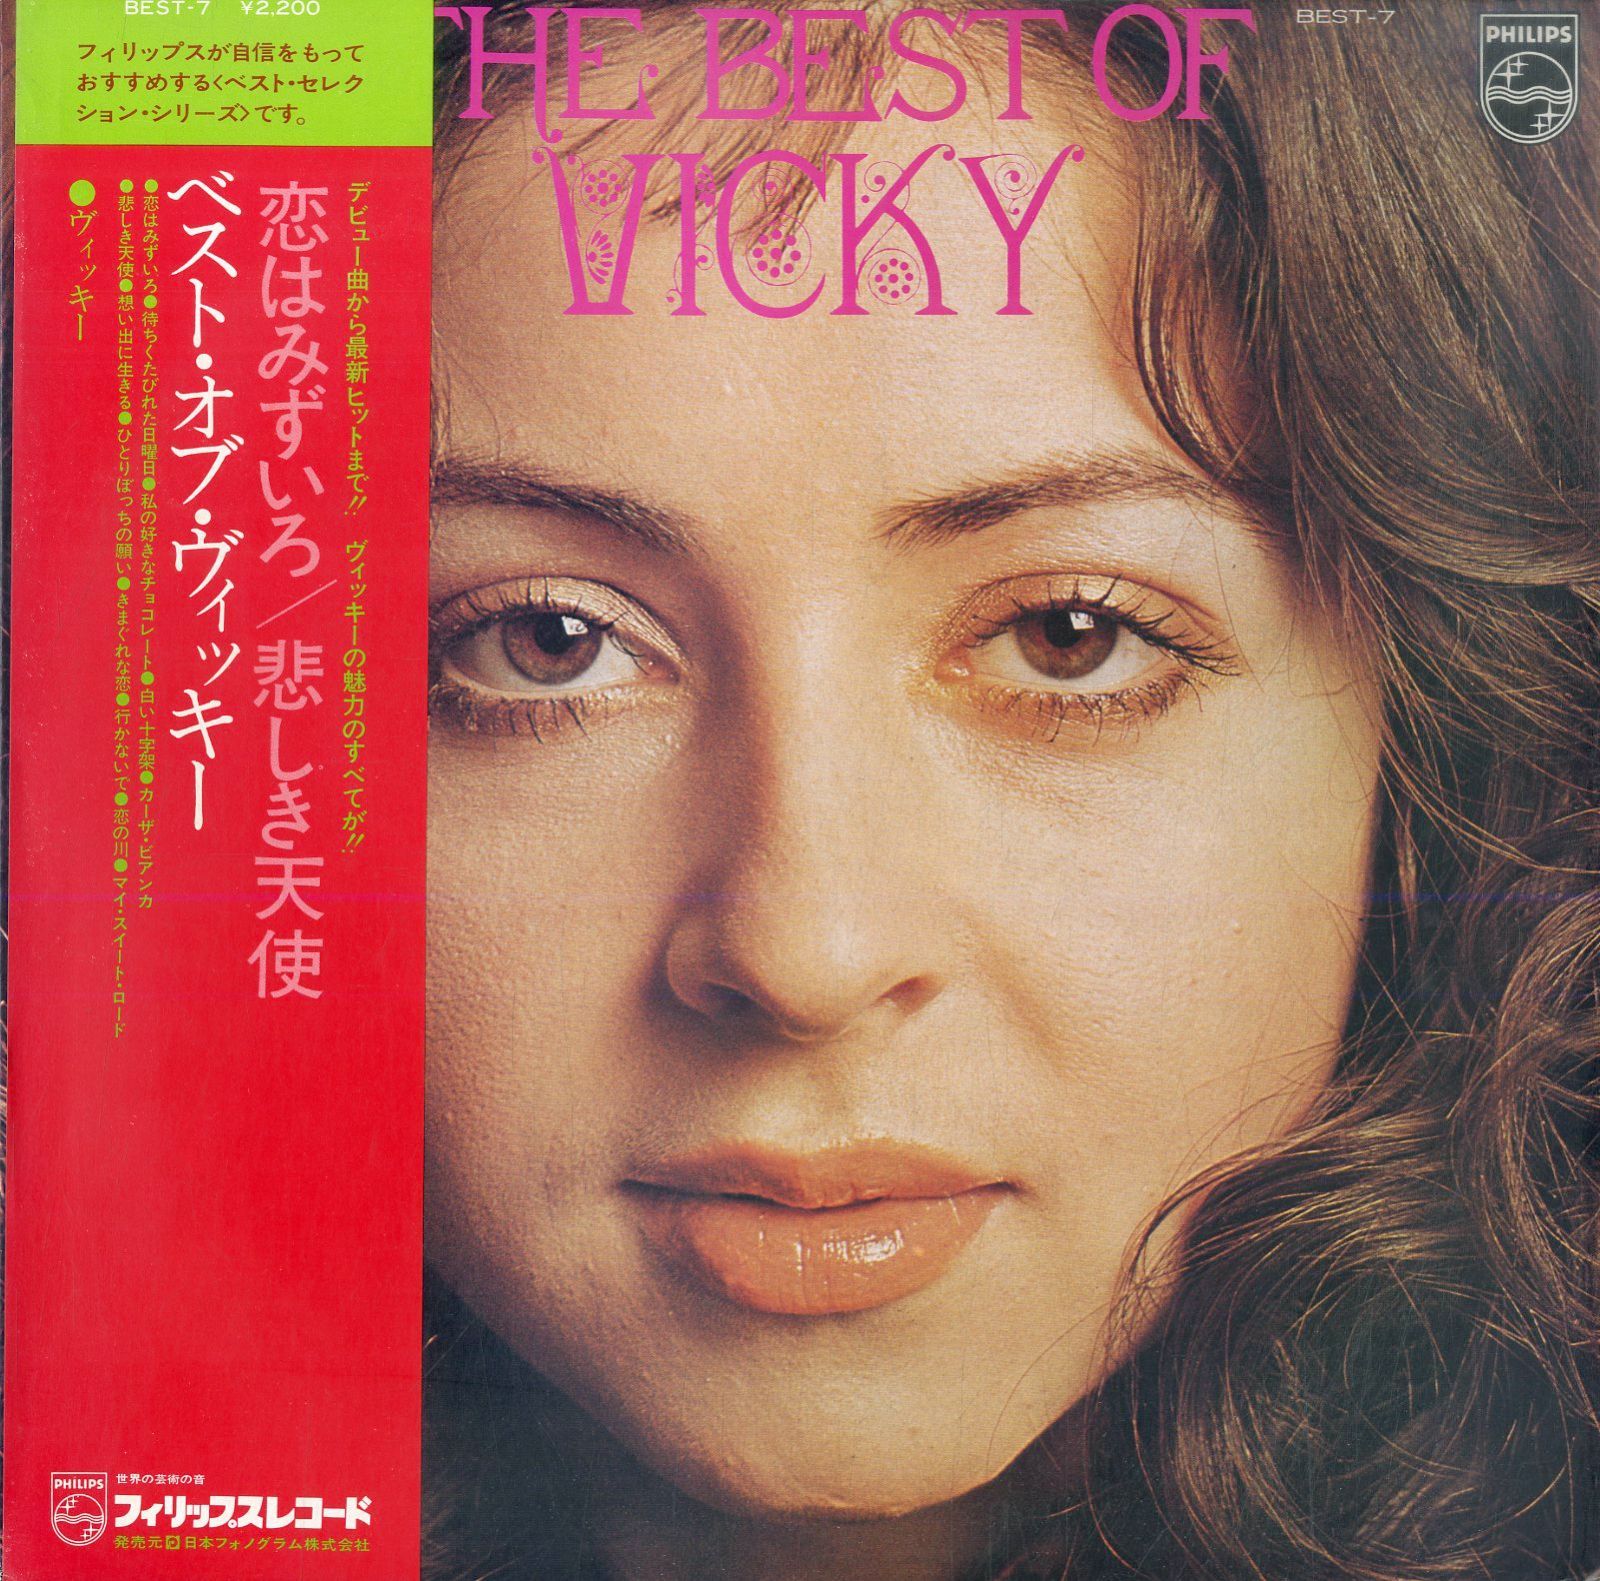 LP1枚 / ヴィッキー (VICKY LEANDROS) / The Best Of Vicky (1973年・BEST-7・ヴォーカル) /  A00579186 - メルカリ